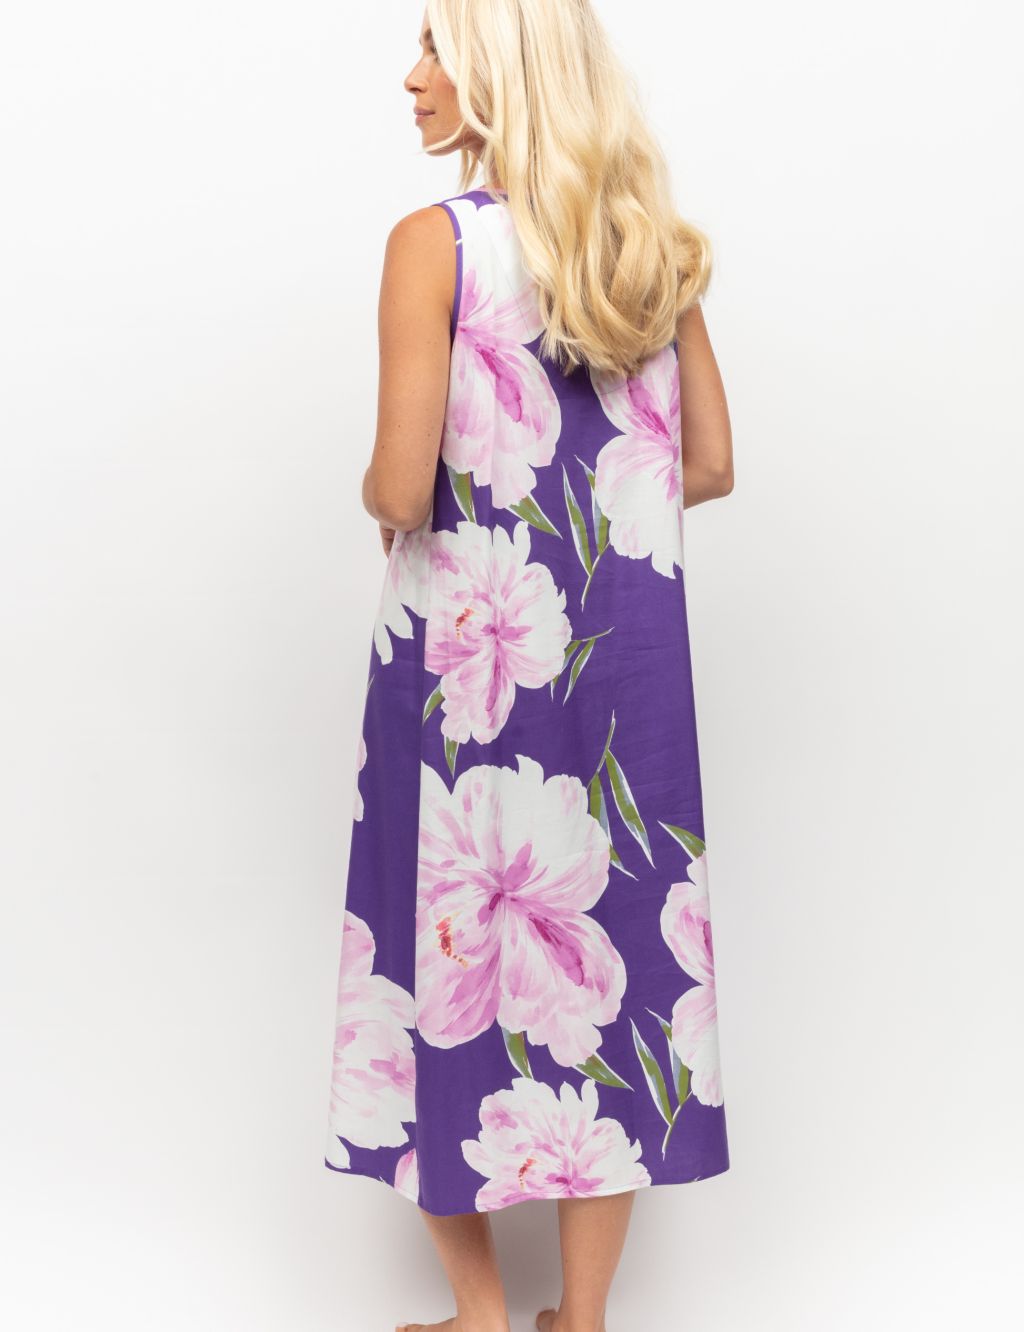 Cotton Modal Floral Nightdress image 4